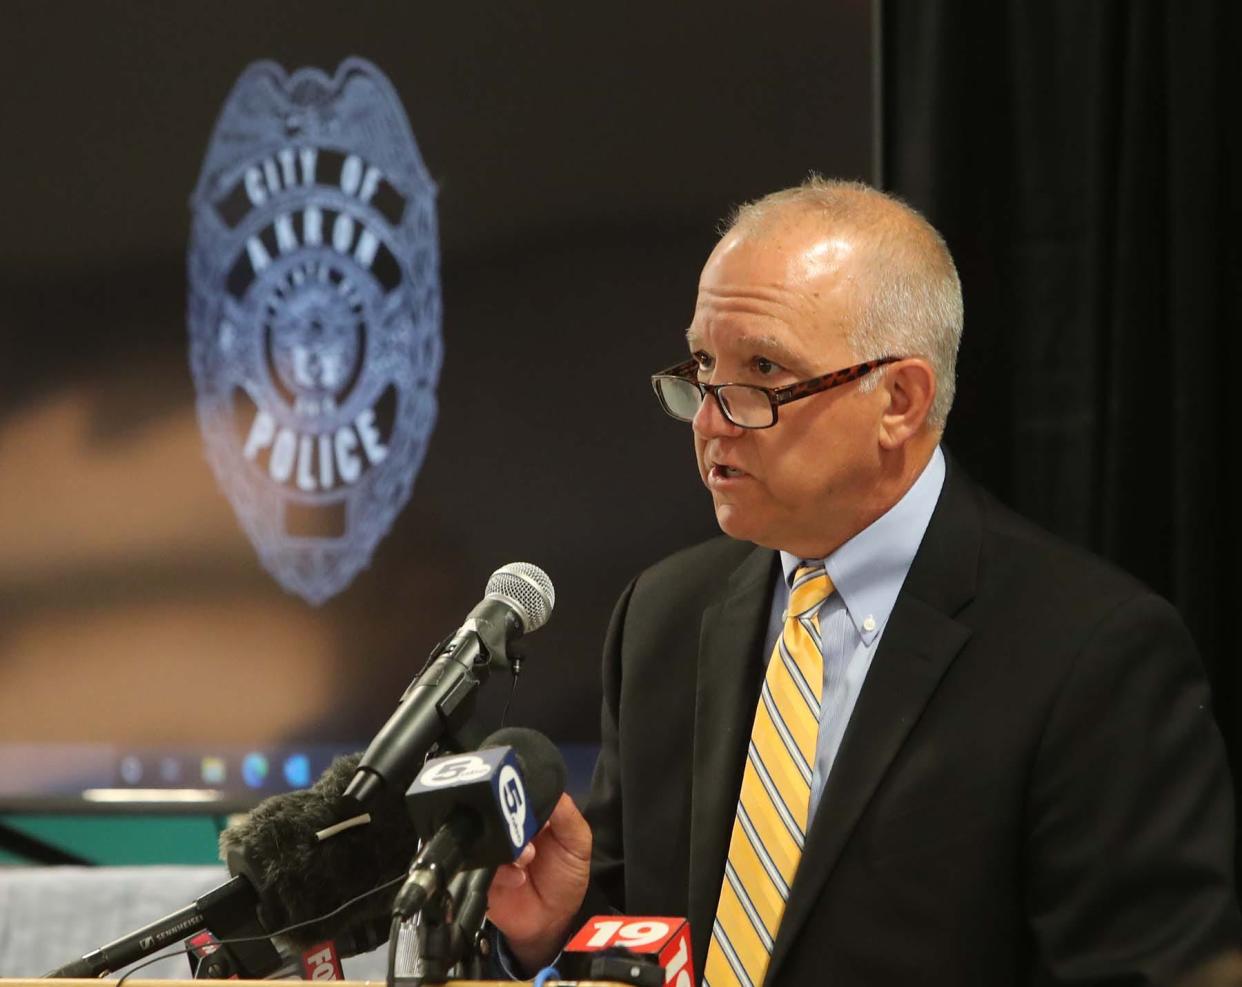 Akron Mayor Dan Horrigan speaks during a news conference July 3 at the Firestone Park Community Center in Akron before the presentation of the body cam videos in the police shooting of Jayland Walker.